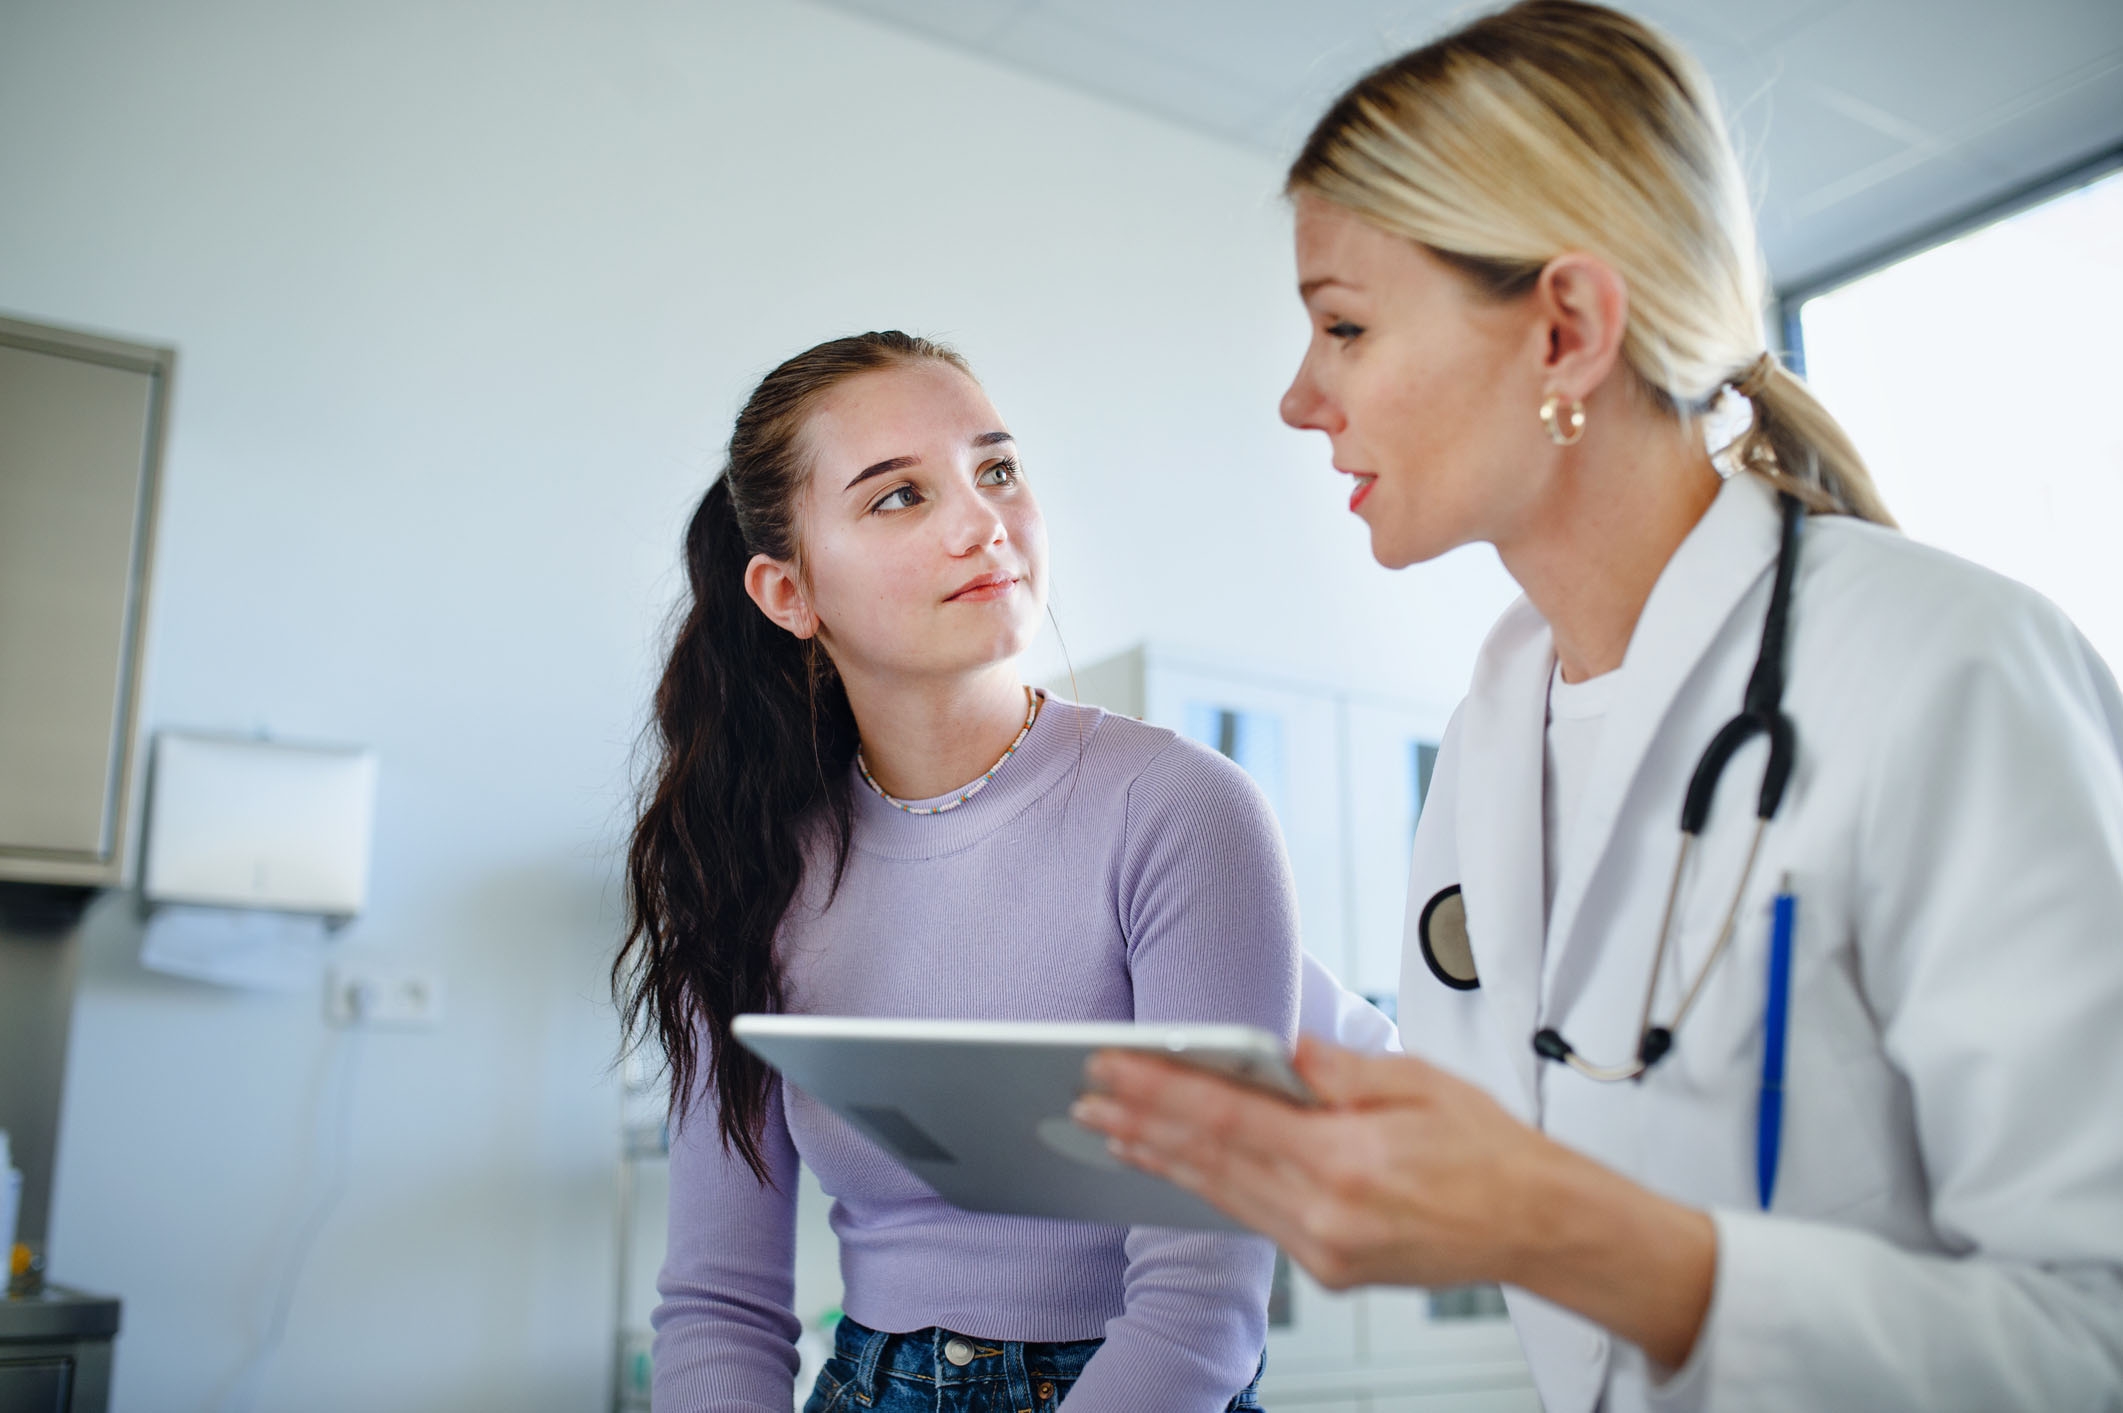 Female teen patient looks at her doctor during an appointment